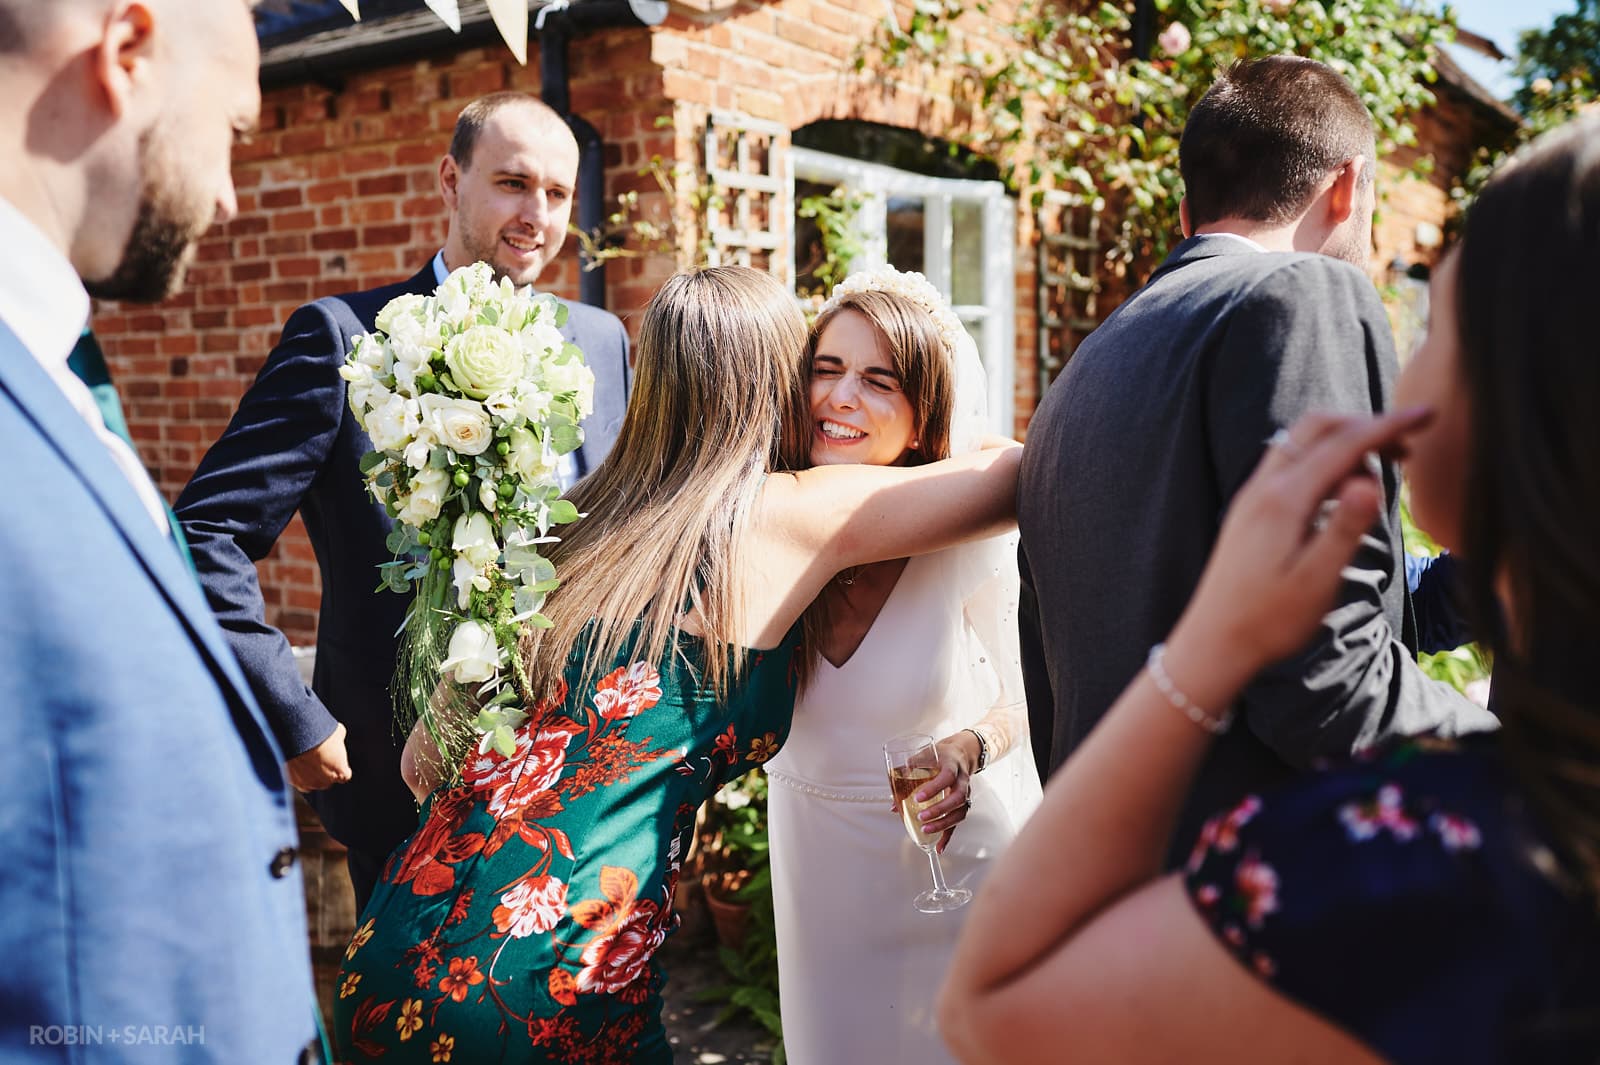 Guests relax and congratulate couple during wedding drinks reception at Wethele Manor